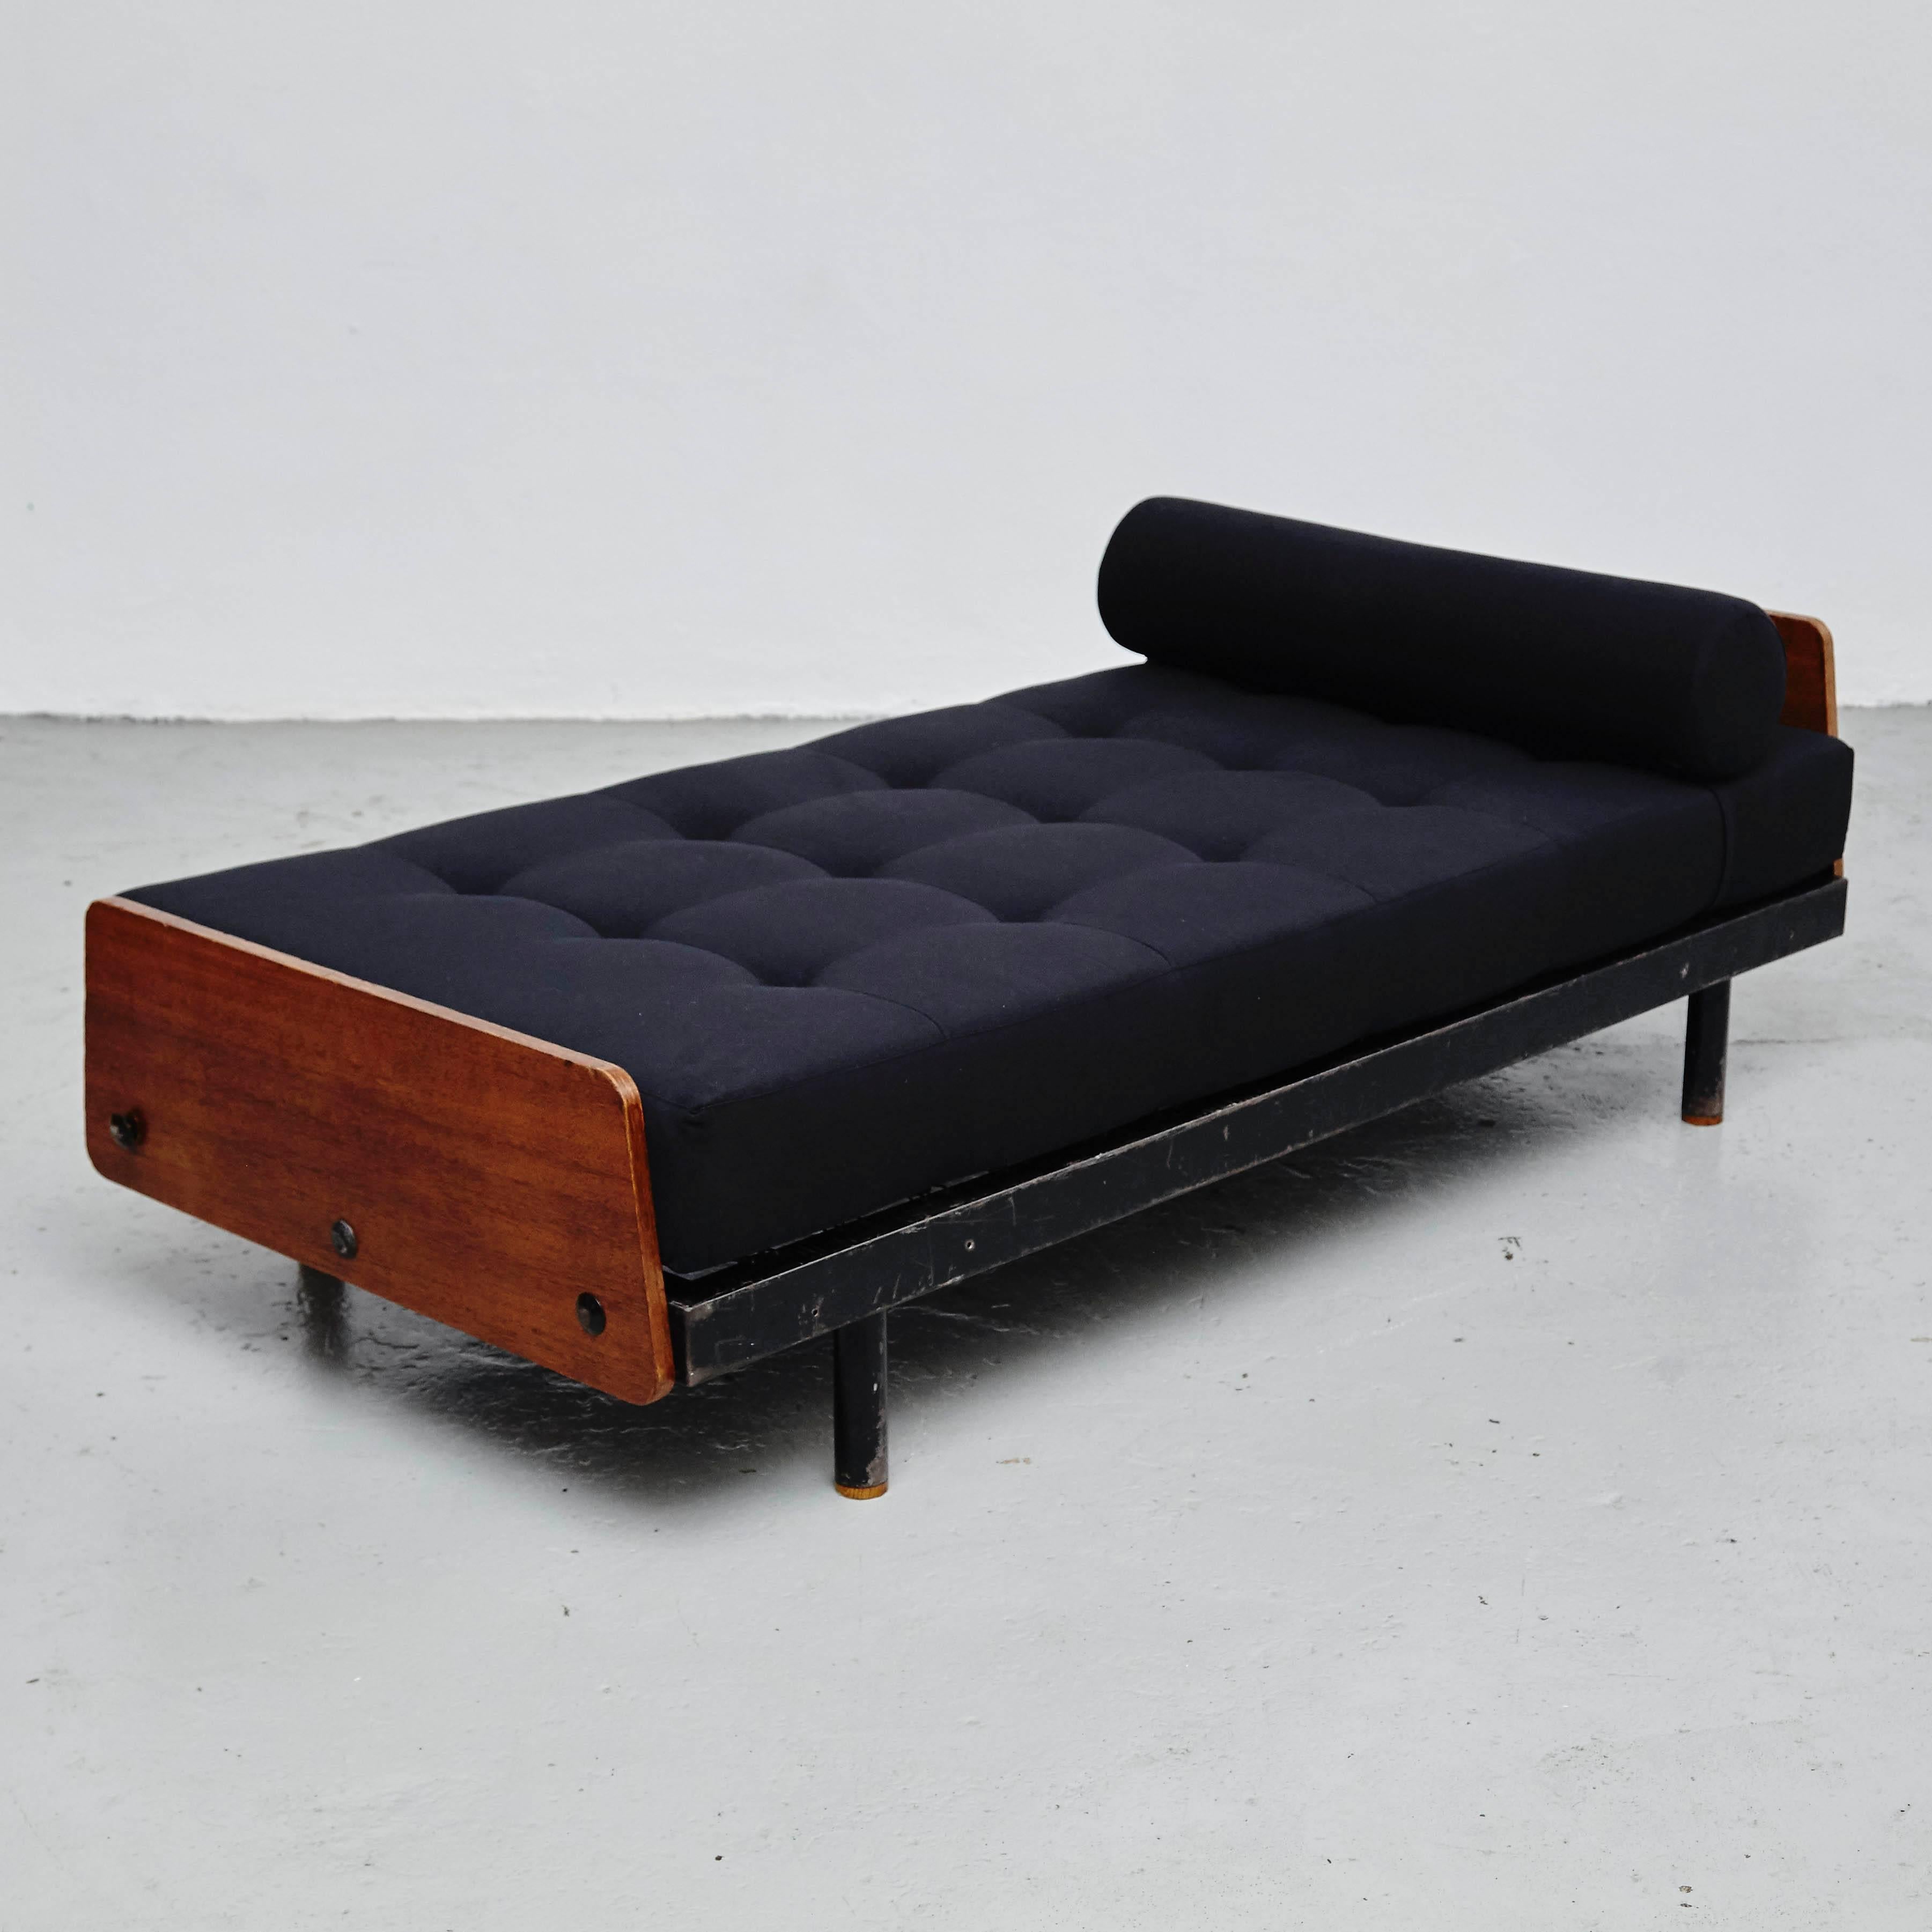 Daybed designed by Jean Prouve manufactured by Ateliers Prouve (France) circa 1950.

In good original condition with minor wear consistent with age and use, preserving a beautiful patina.

Jean Prouve (1901-1984): French Industrial and Furniture